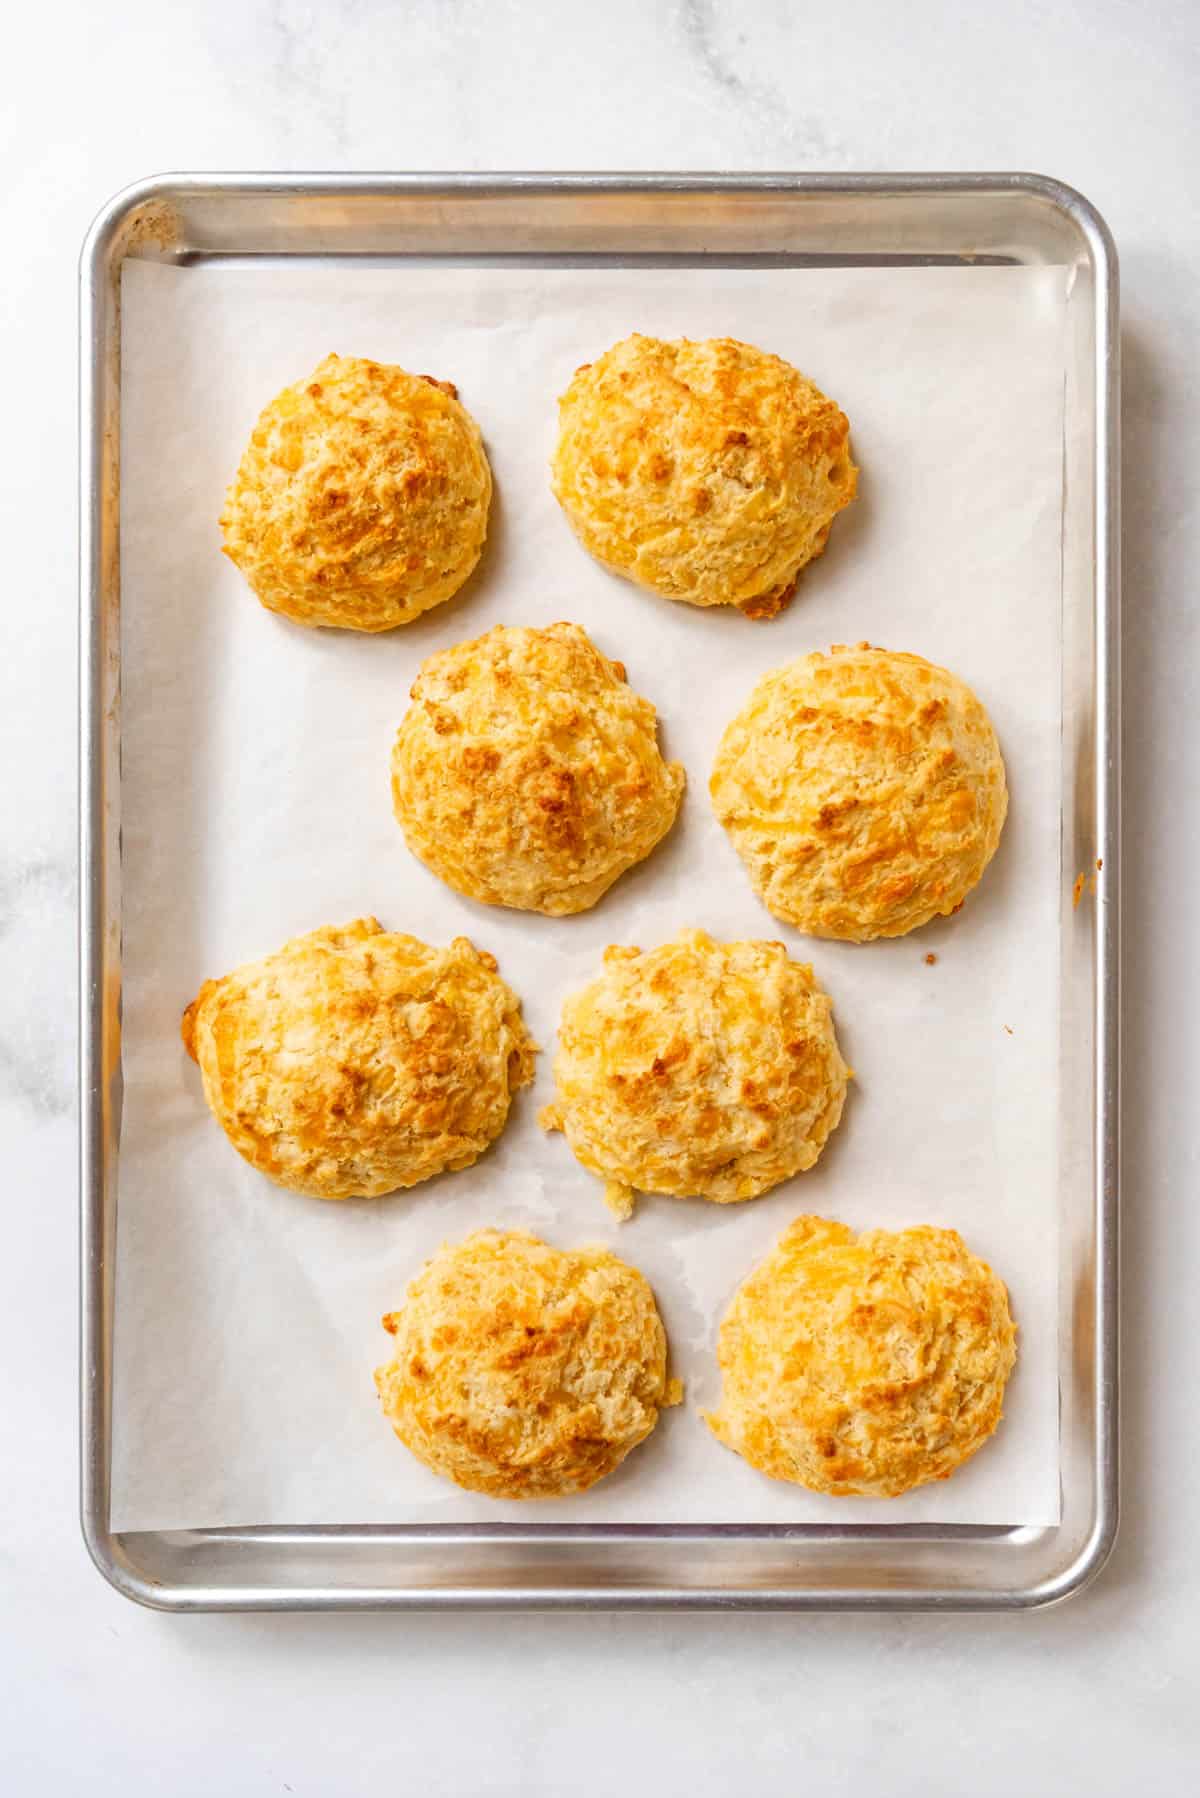 Baked cheddar bay biscuits on a baking sheet.